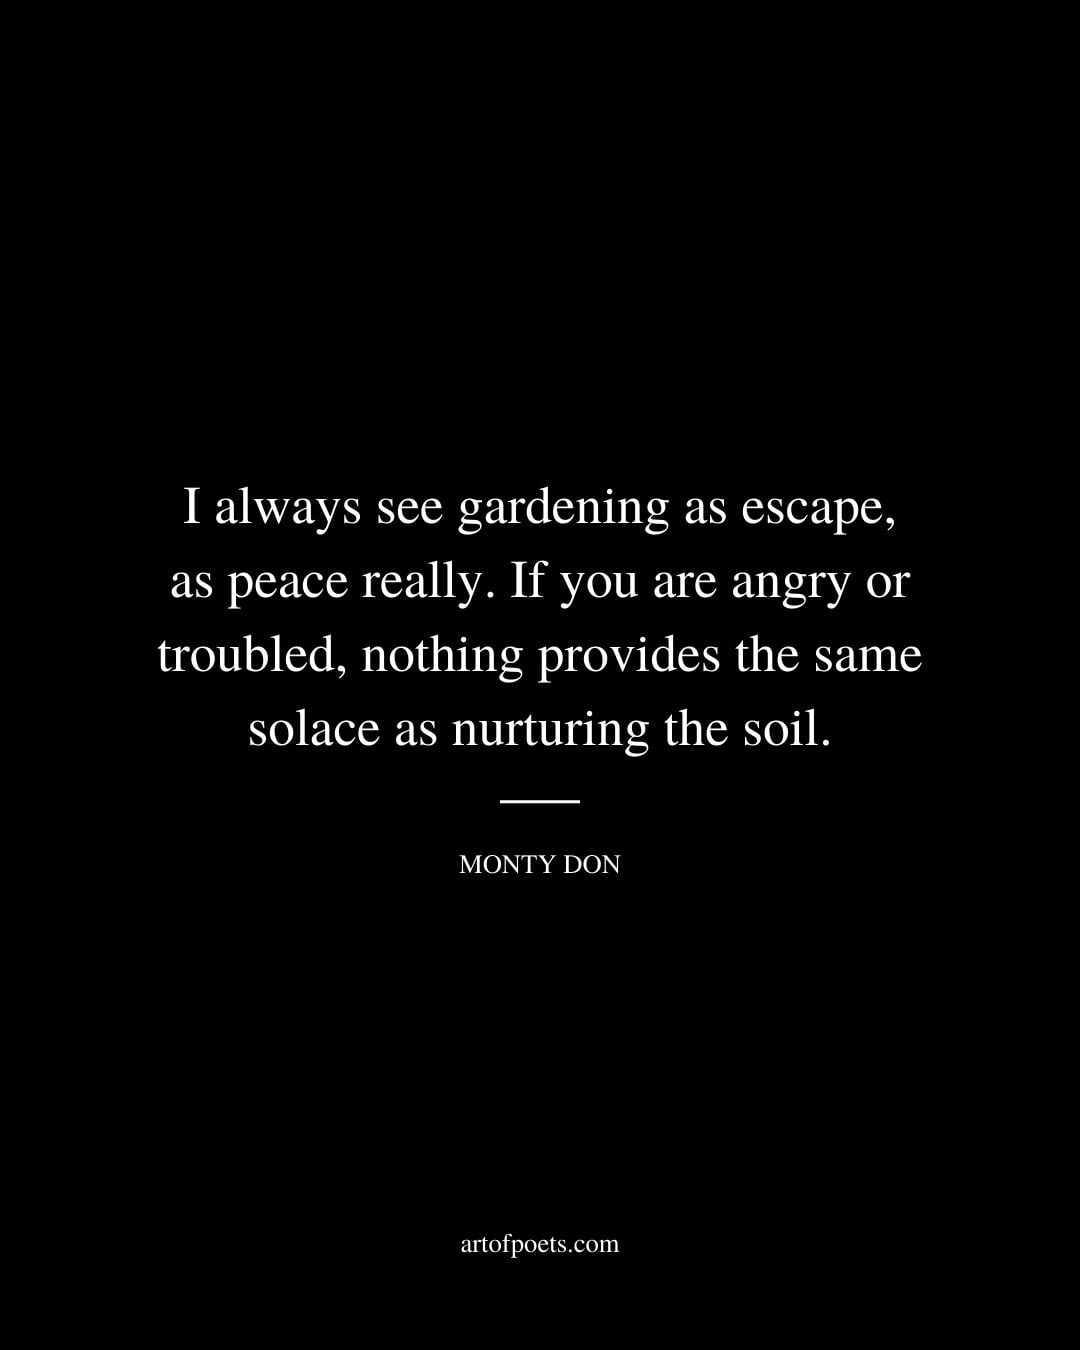 I always see gardening as escape as peace really. If you are angry or troubled nothing provides the same solace as nurturing the soil. – Monty Don